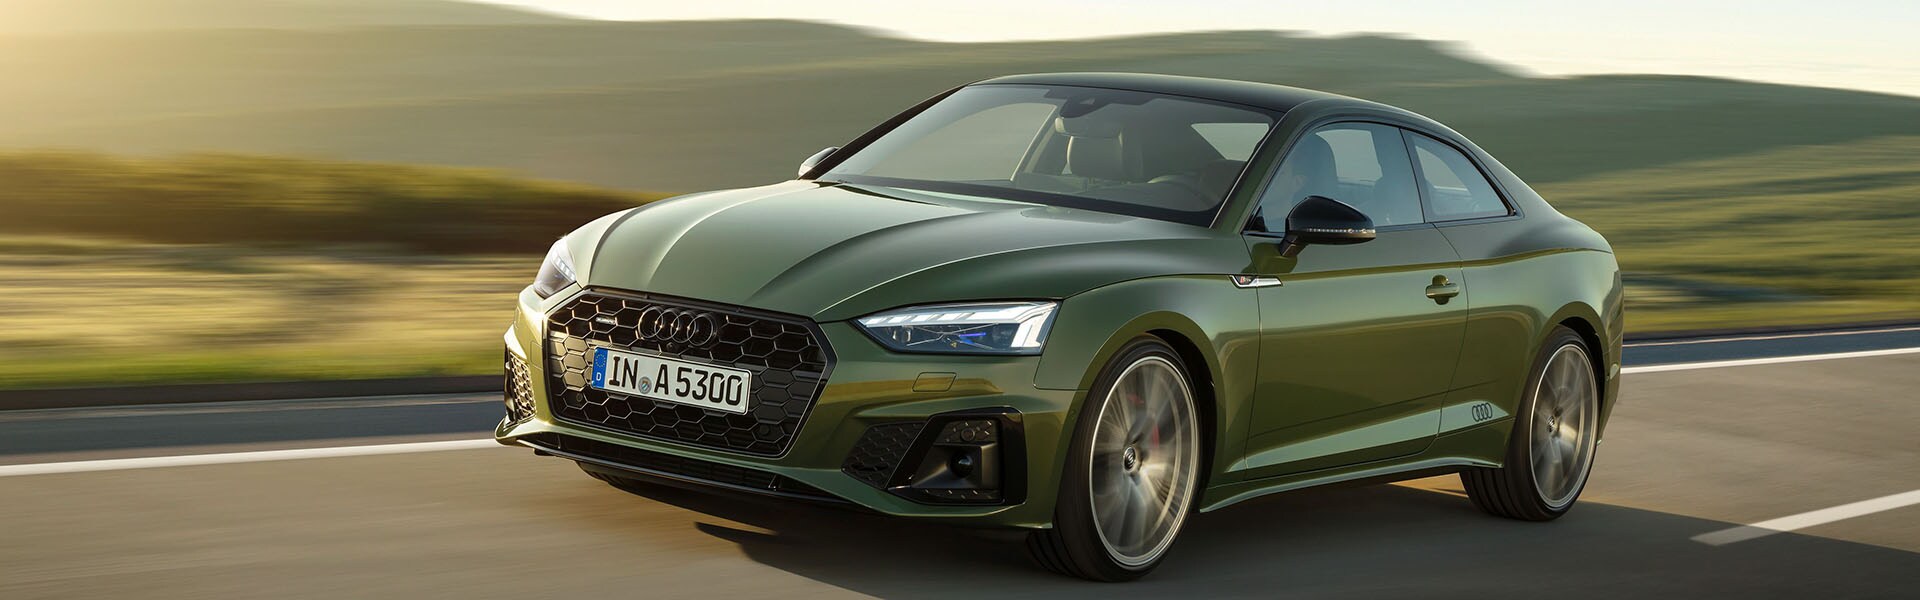 The new 2021 Audi A5 in green drive on country road.